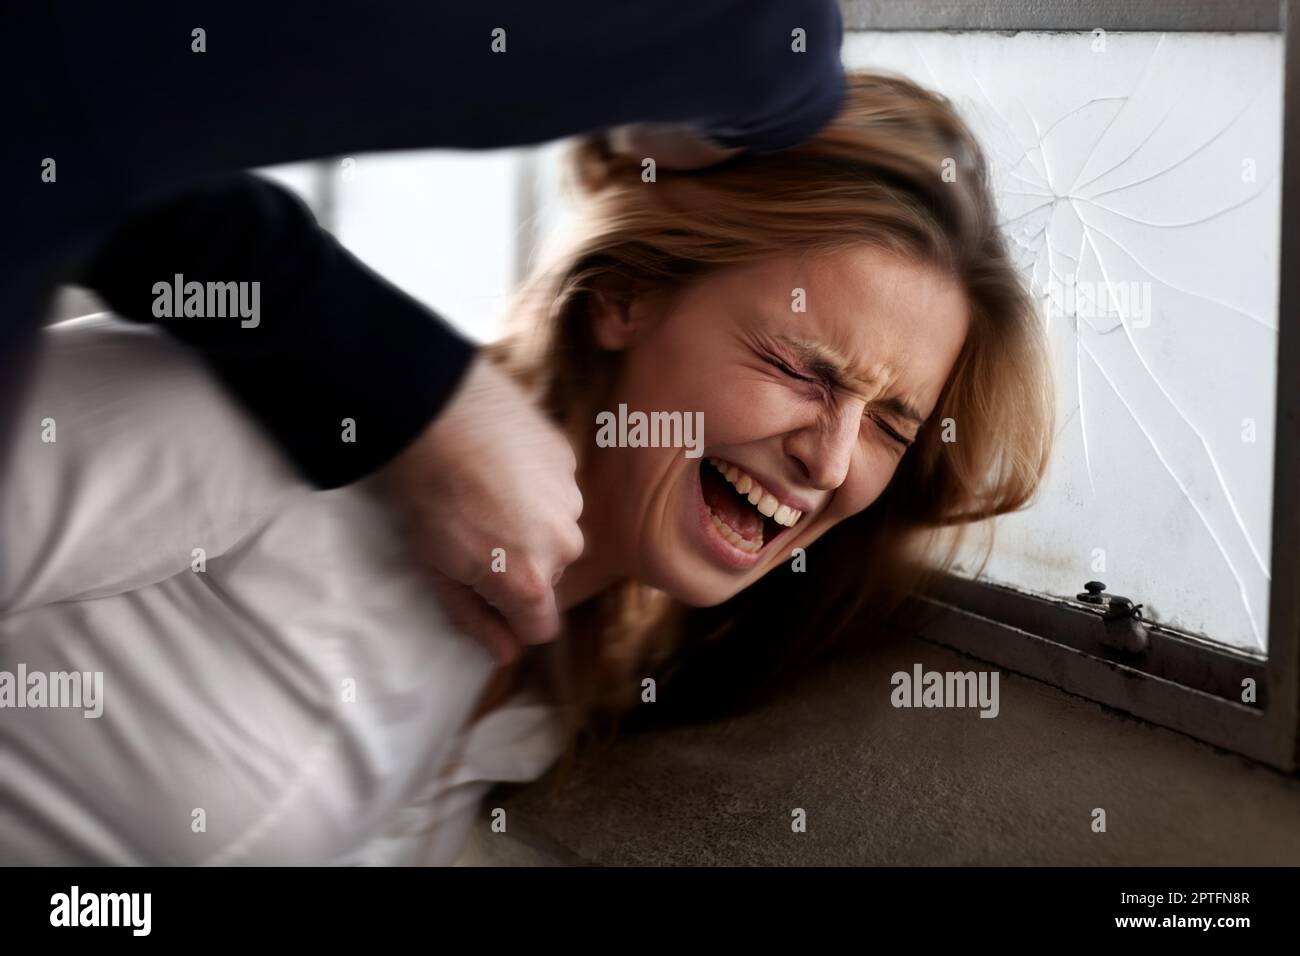 Act of violence. Abused young woman with her head being smashed against a window by an attacker Stock Photo